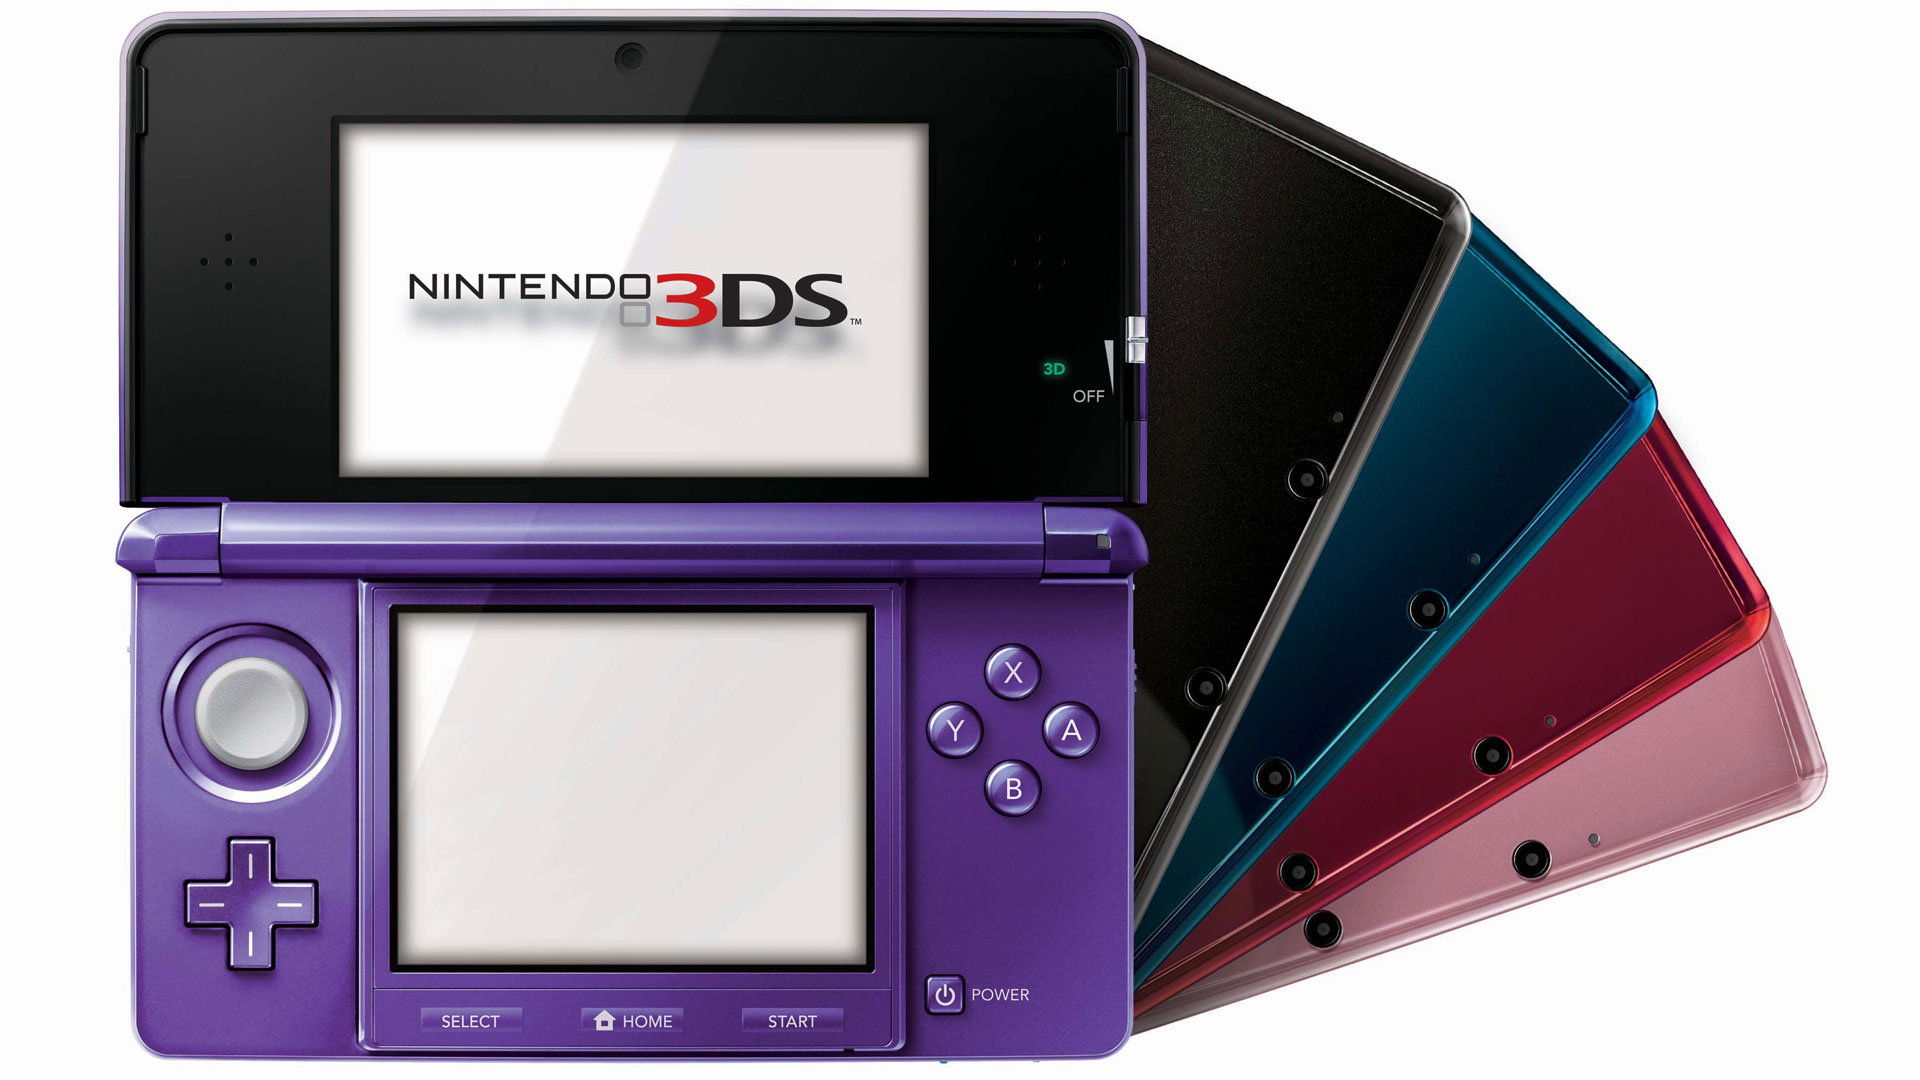 Nintendo Discontinued The 3DS